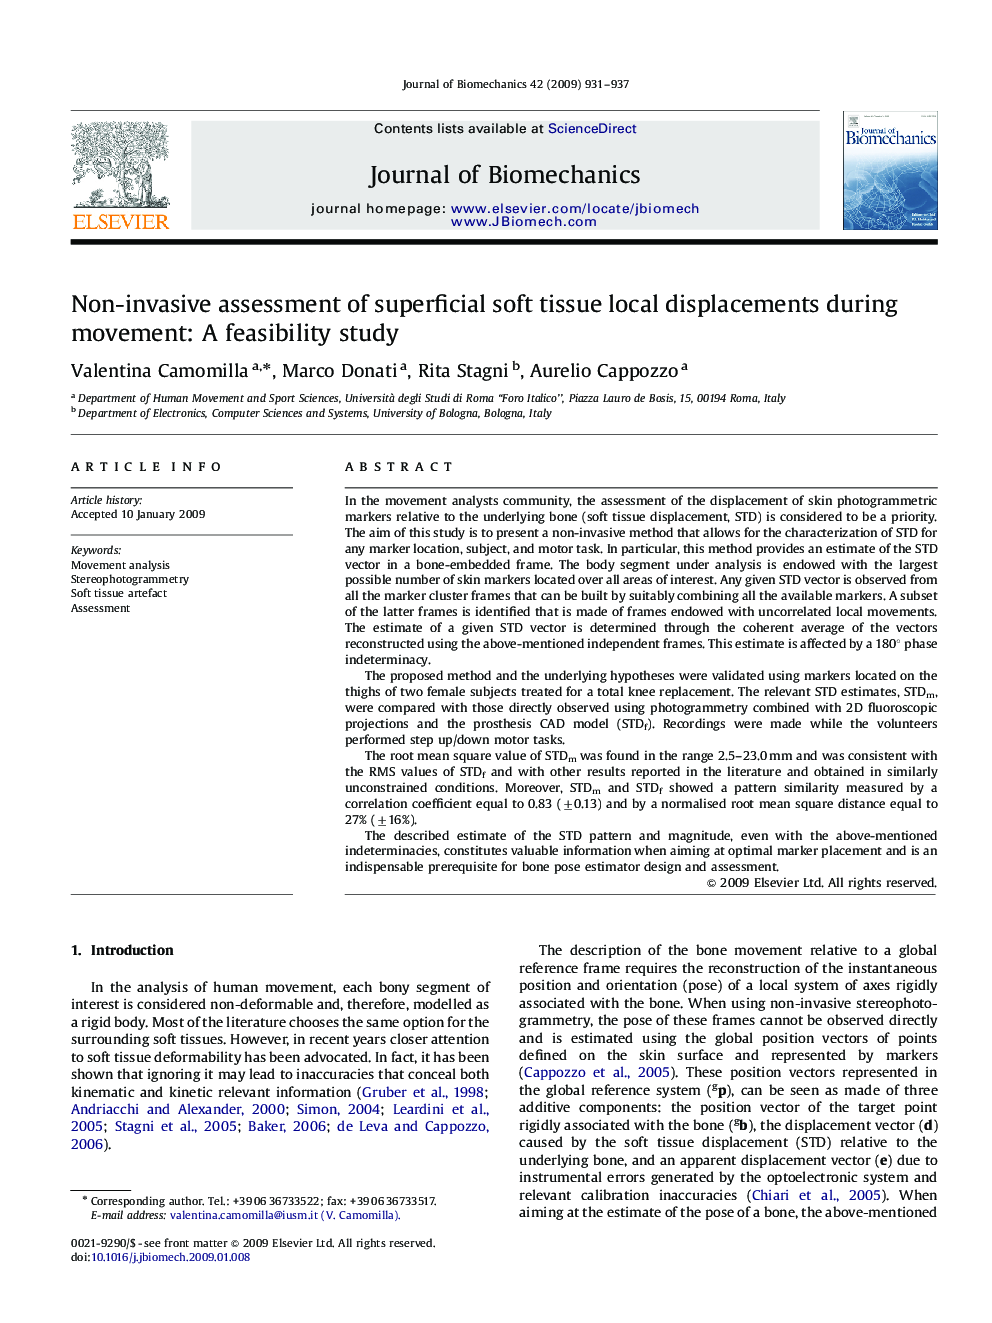 Non-invasive assessment of superficial soft tissue local displacements during movement: A feasibility study